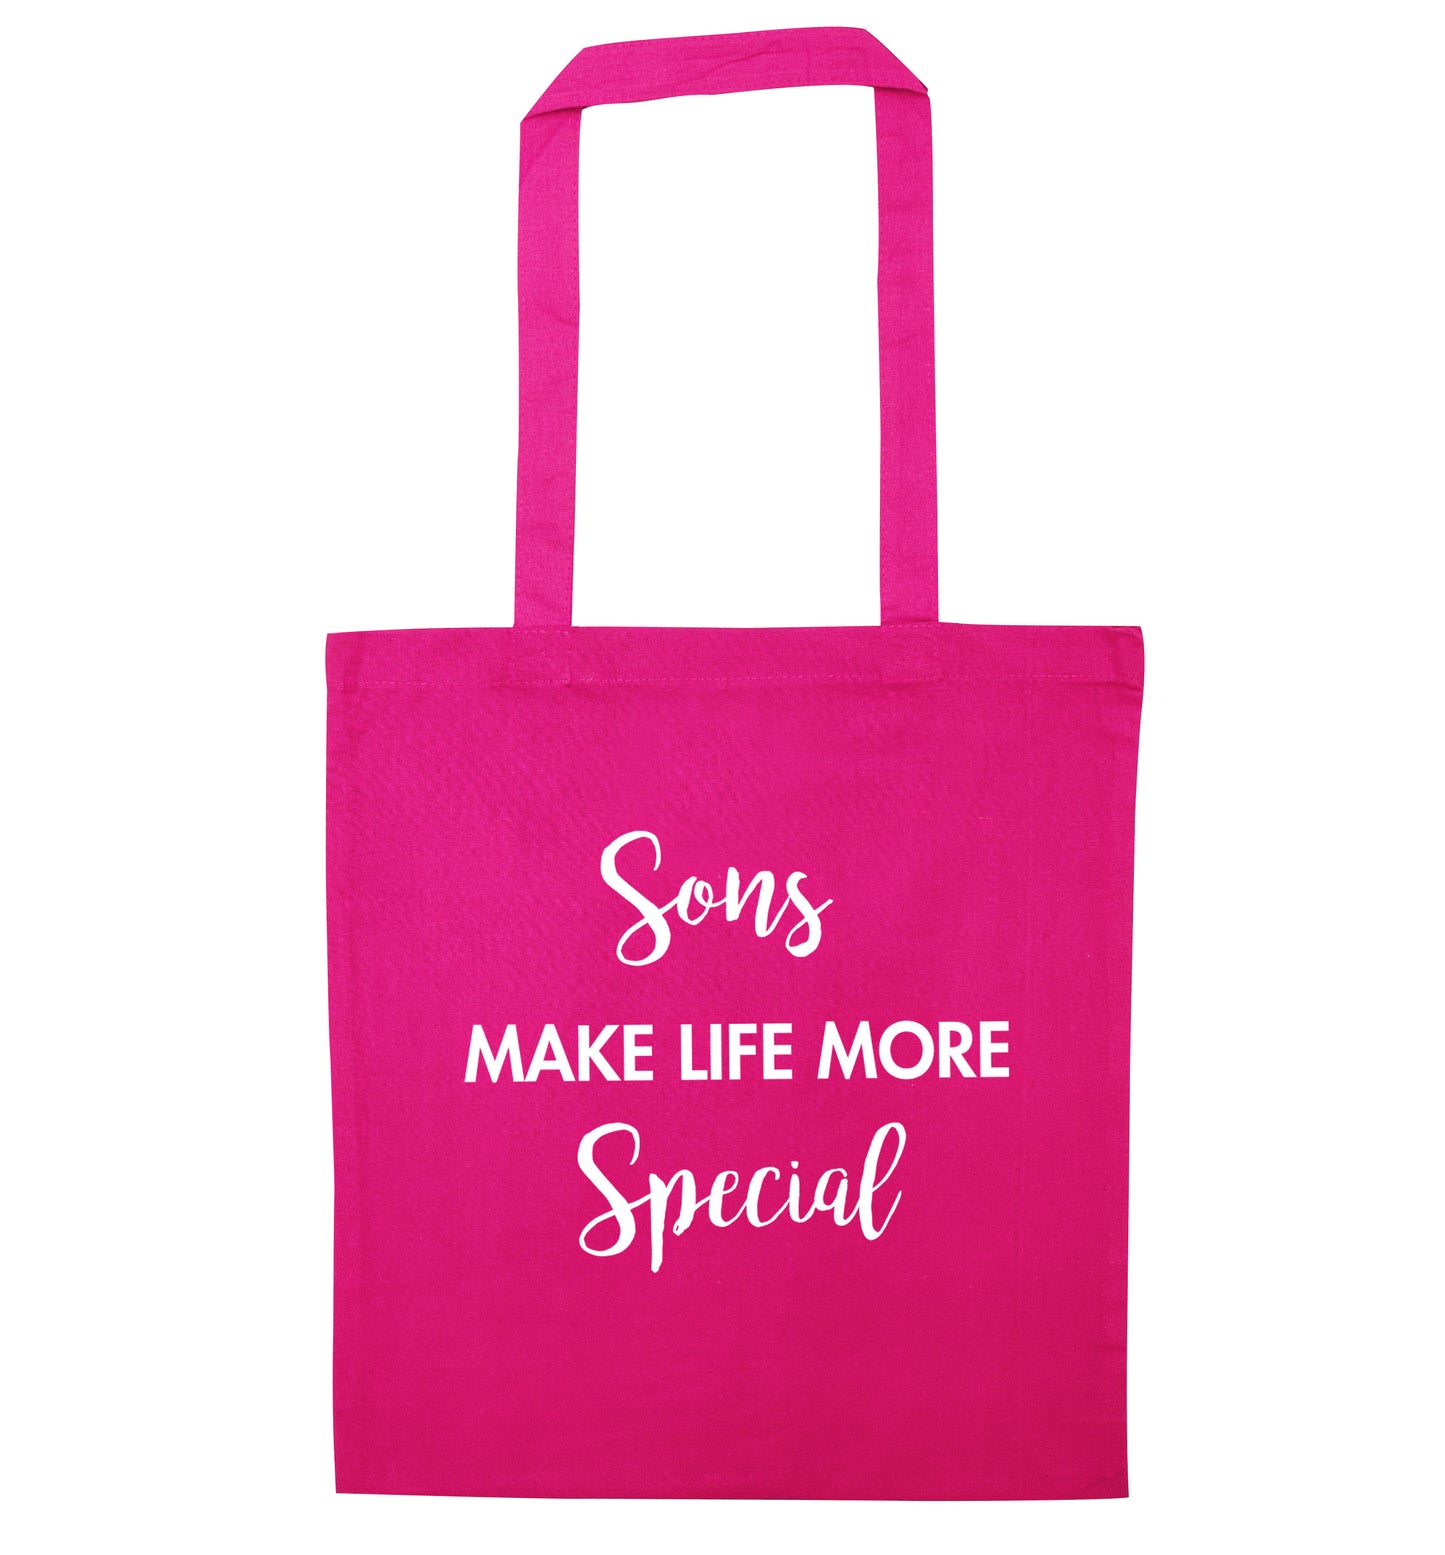 Sons make life more special pink tote bag